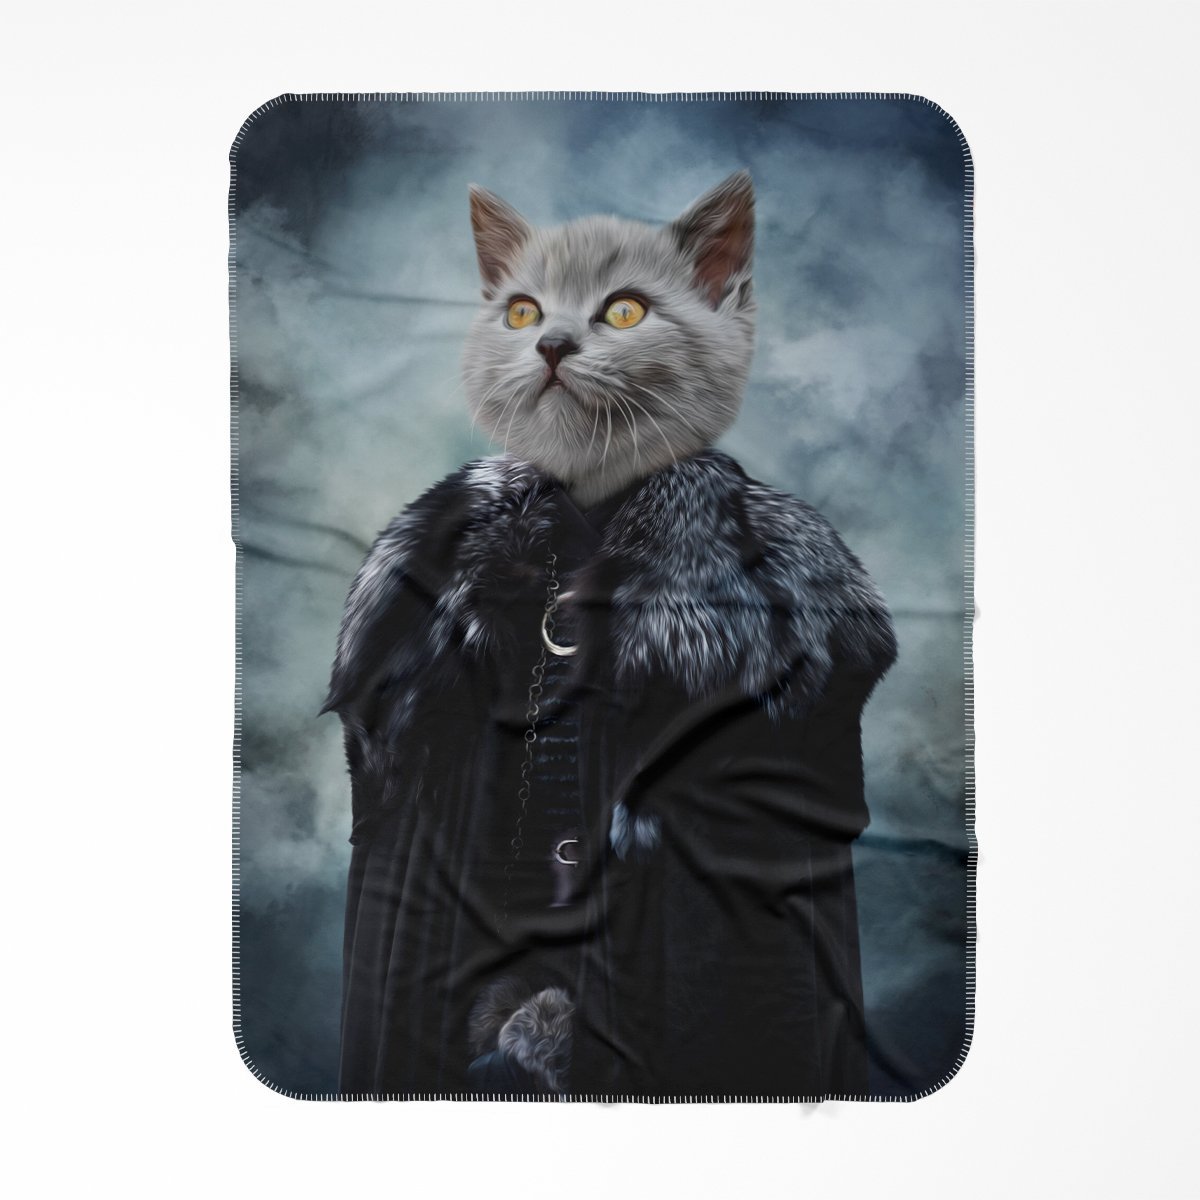 Queen Of The North (GOT Inspired): Custom Pet Blanket - Paw & Glory - #pet portraits# - #dog portraits# - #pet portraits uk#Pawandglory, Pet art blanket,blanket with your cat on it, personalized sherpa dog blanket, customized blanket dog, dog print blanket, cat blanket custom